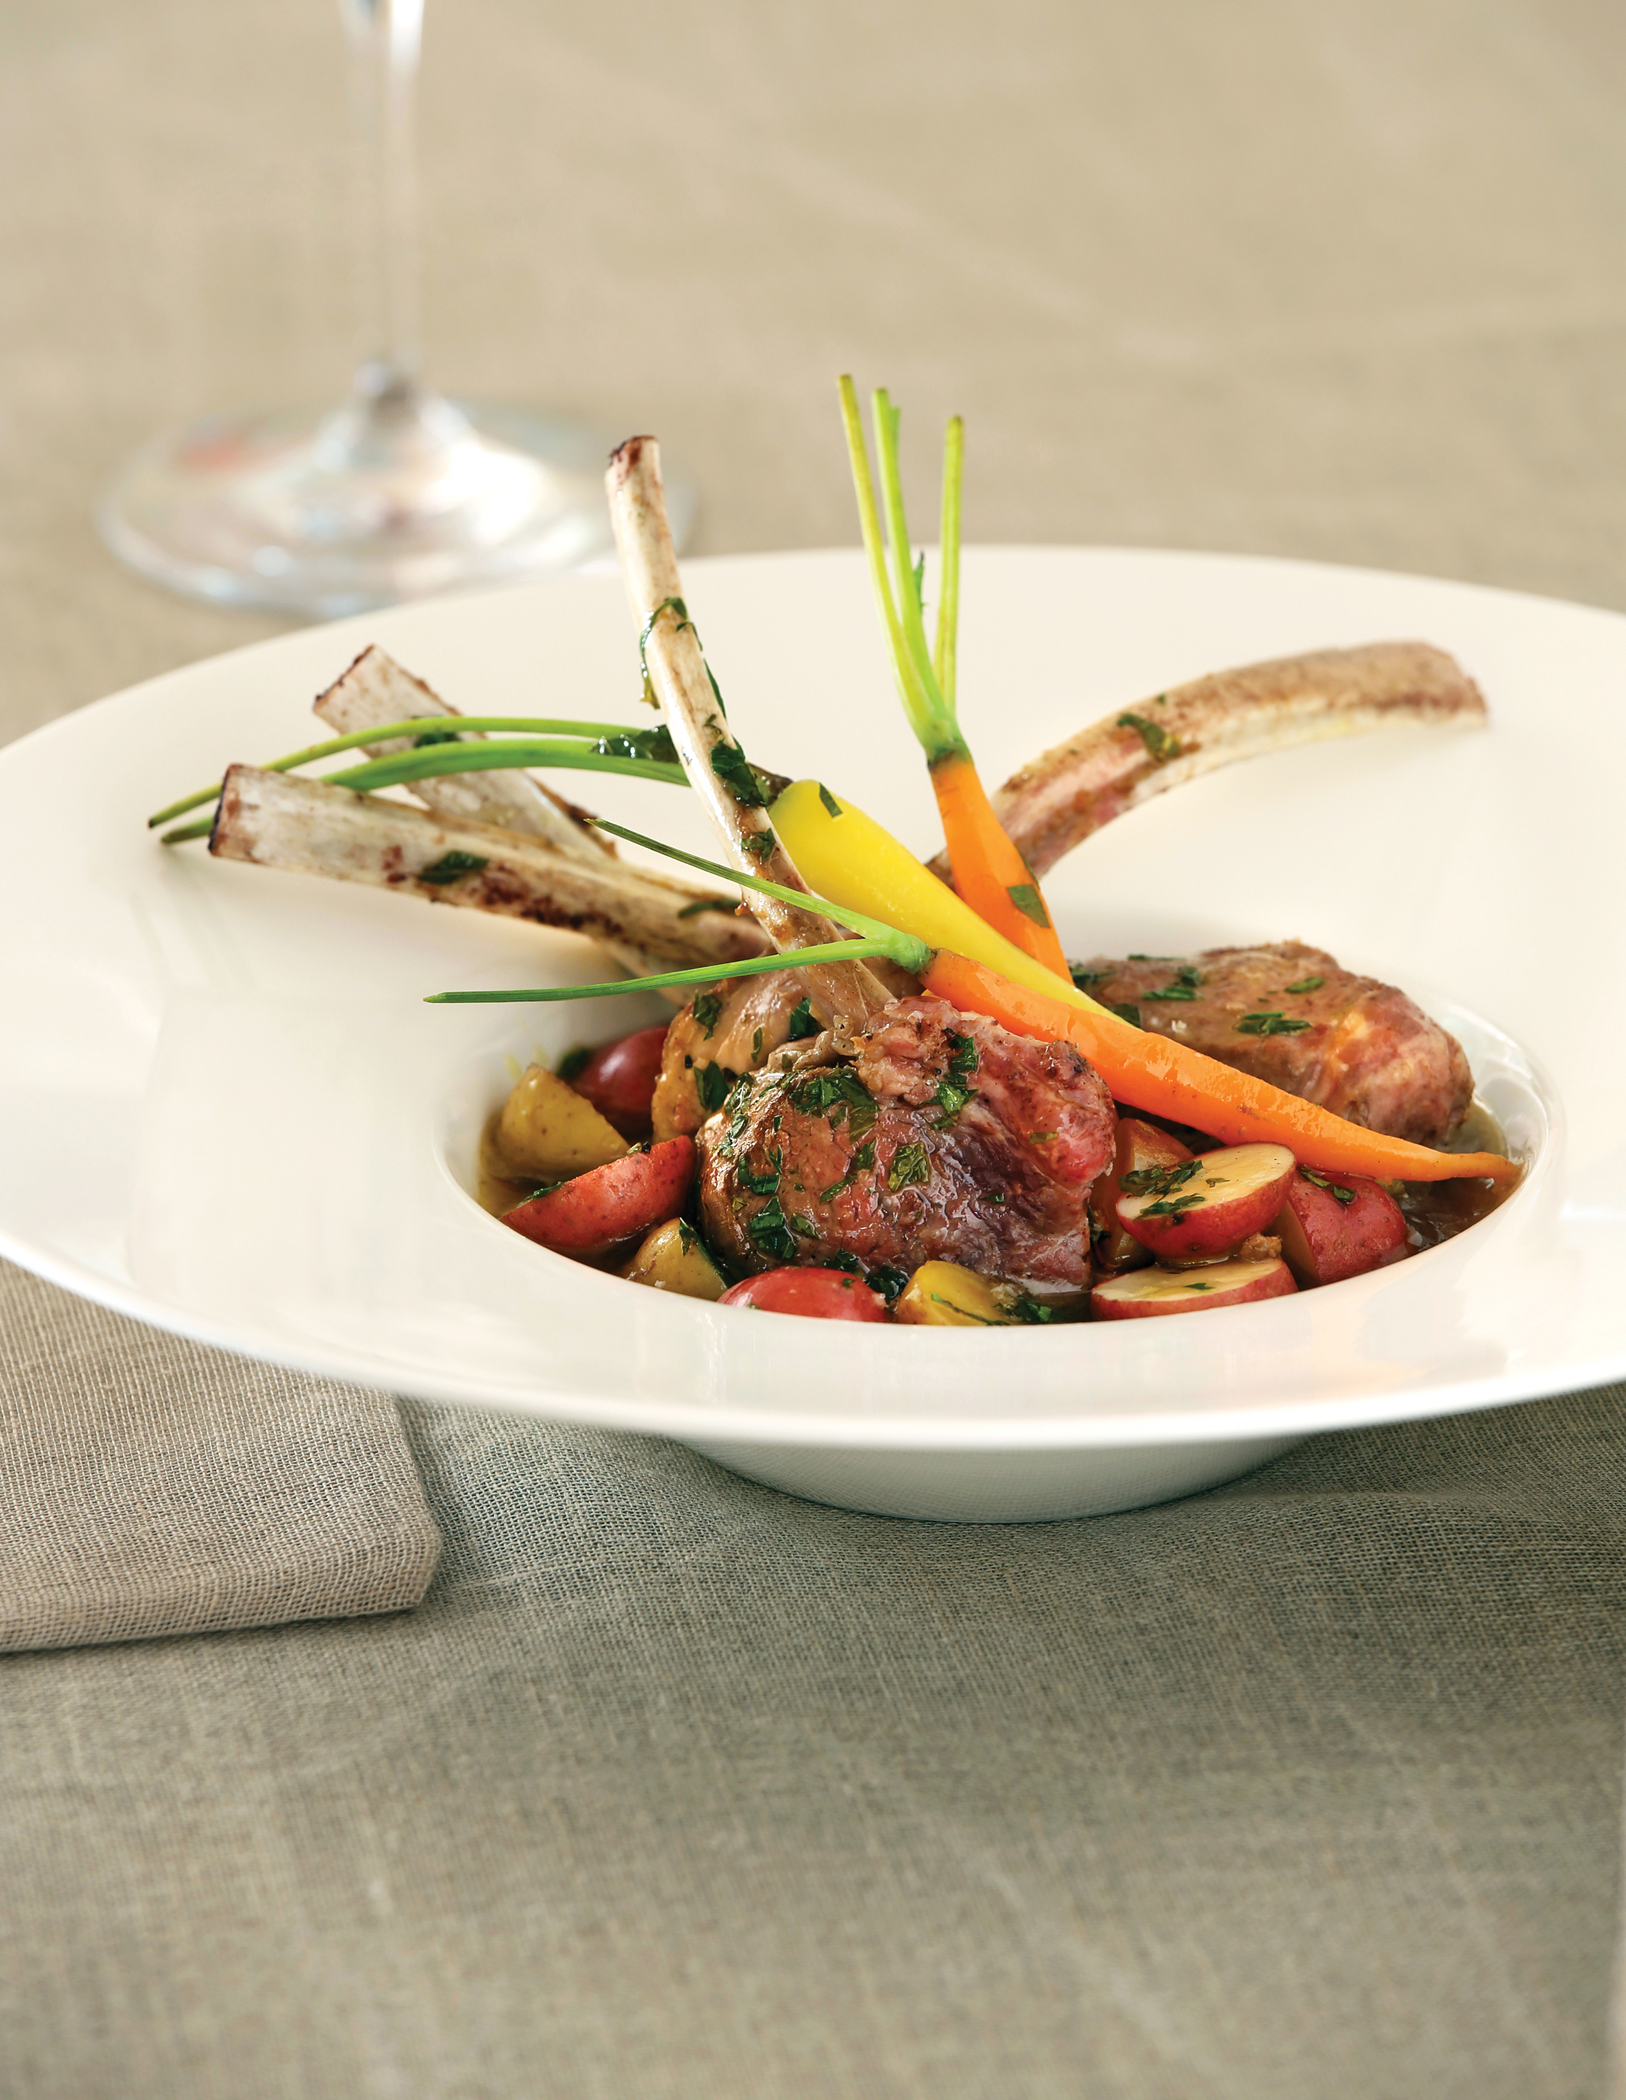 Grilled Lamb Chops from Monet's Palate Cookbook